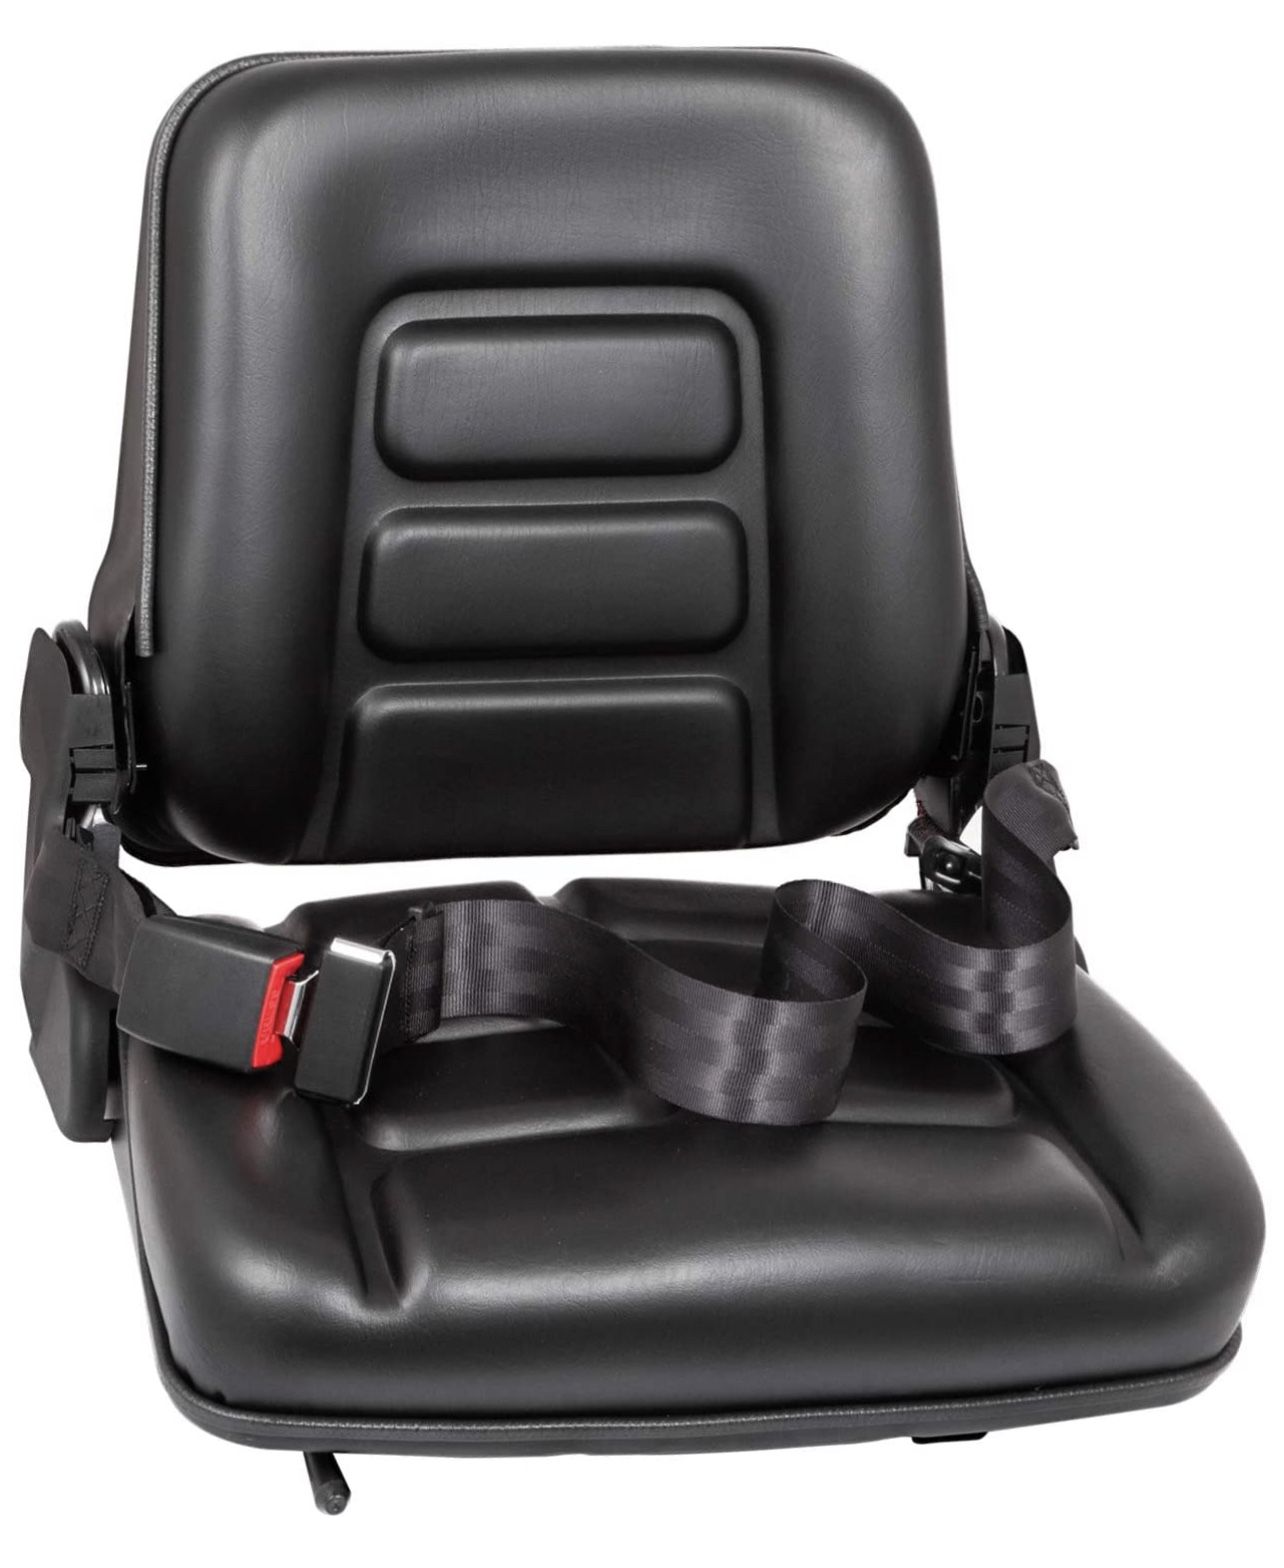 BRAND NEW Universal Adjustable Forklift Seat with Safety Belt, Full Suspension Seat Replacement for Heavy Mechanical Seat